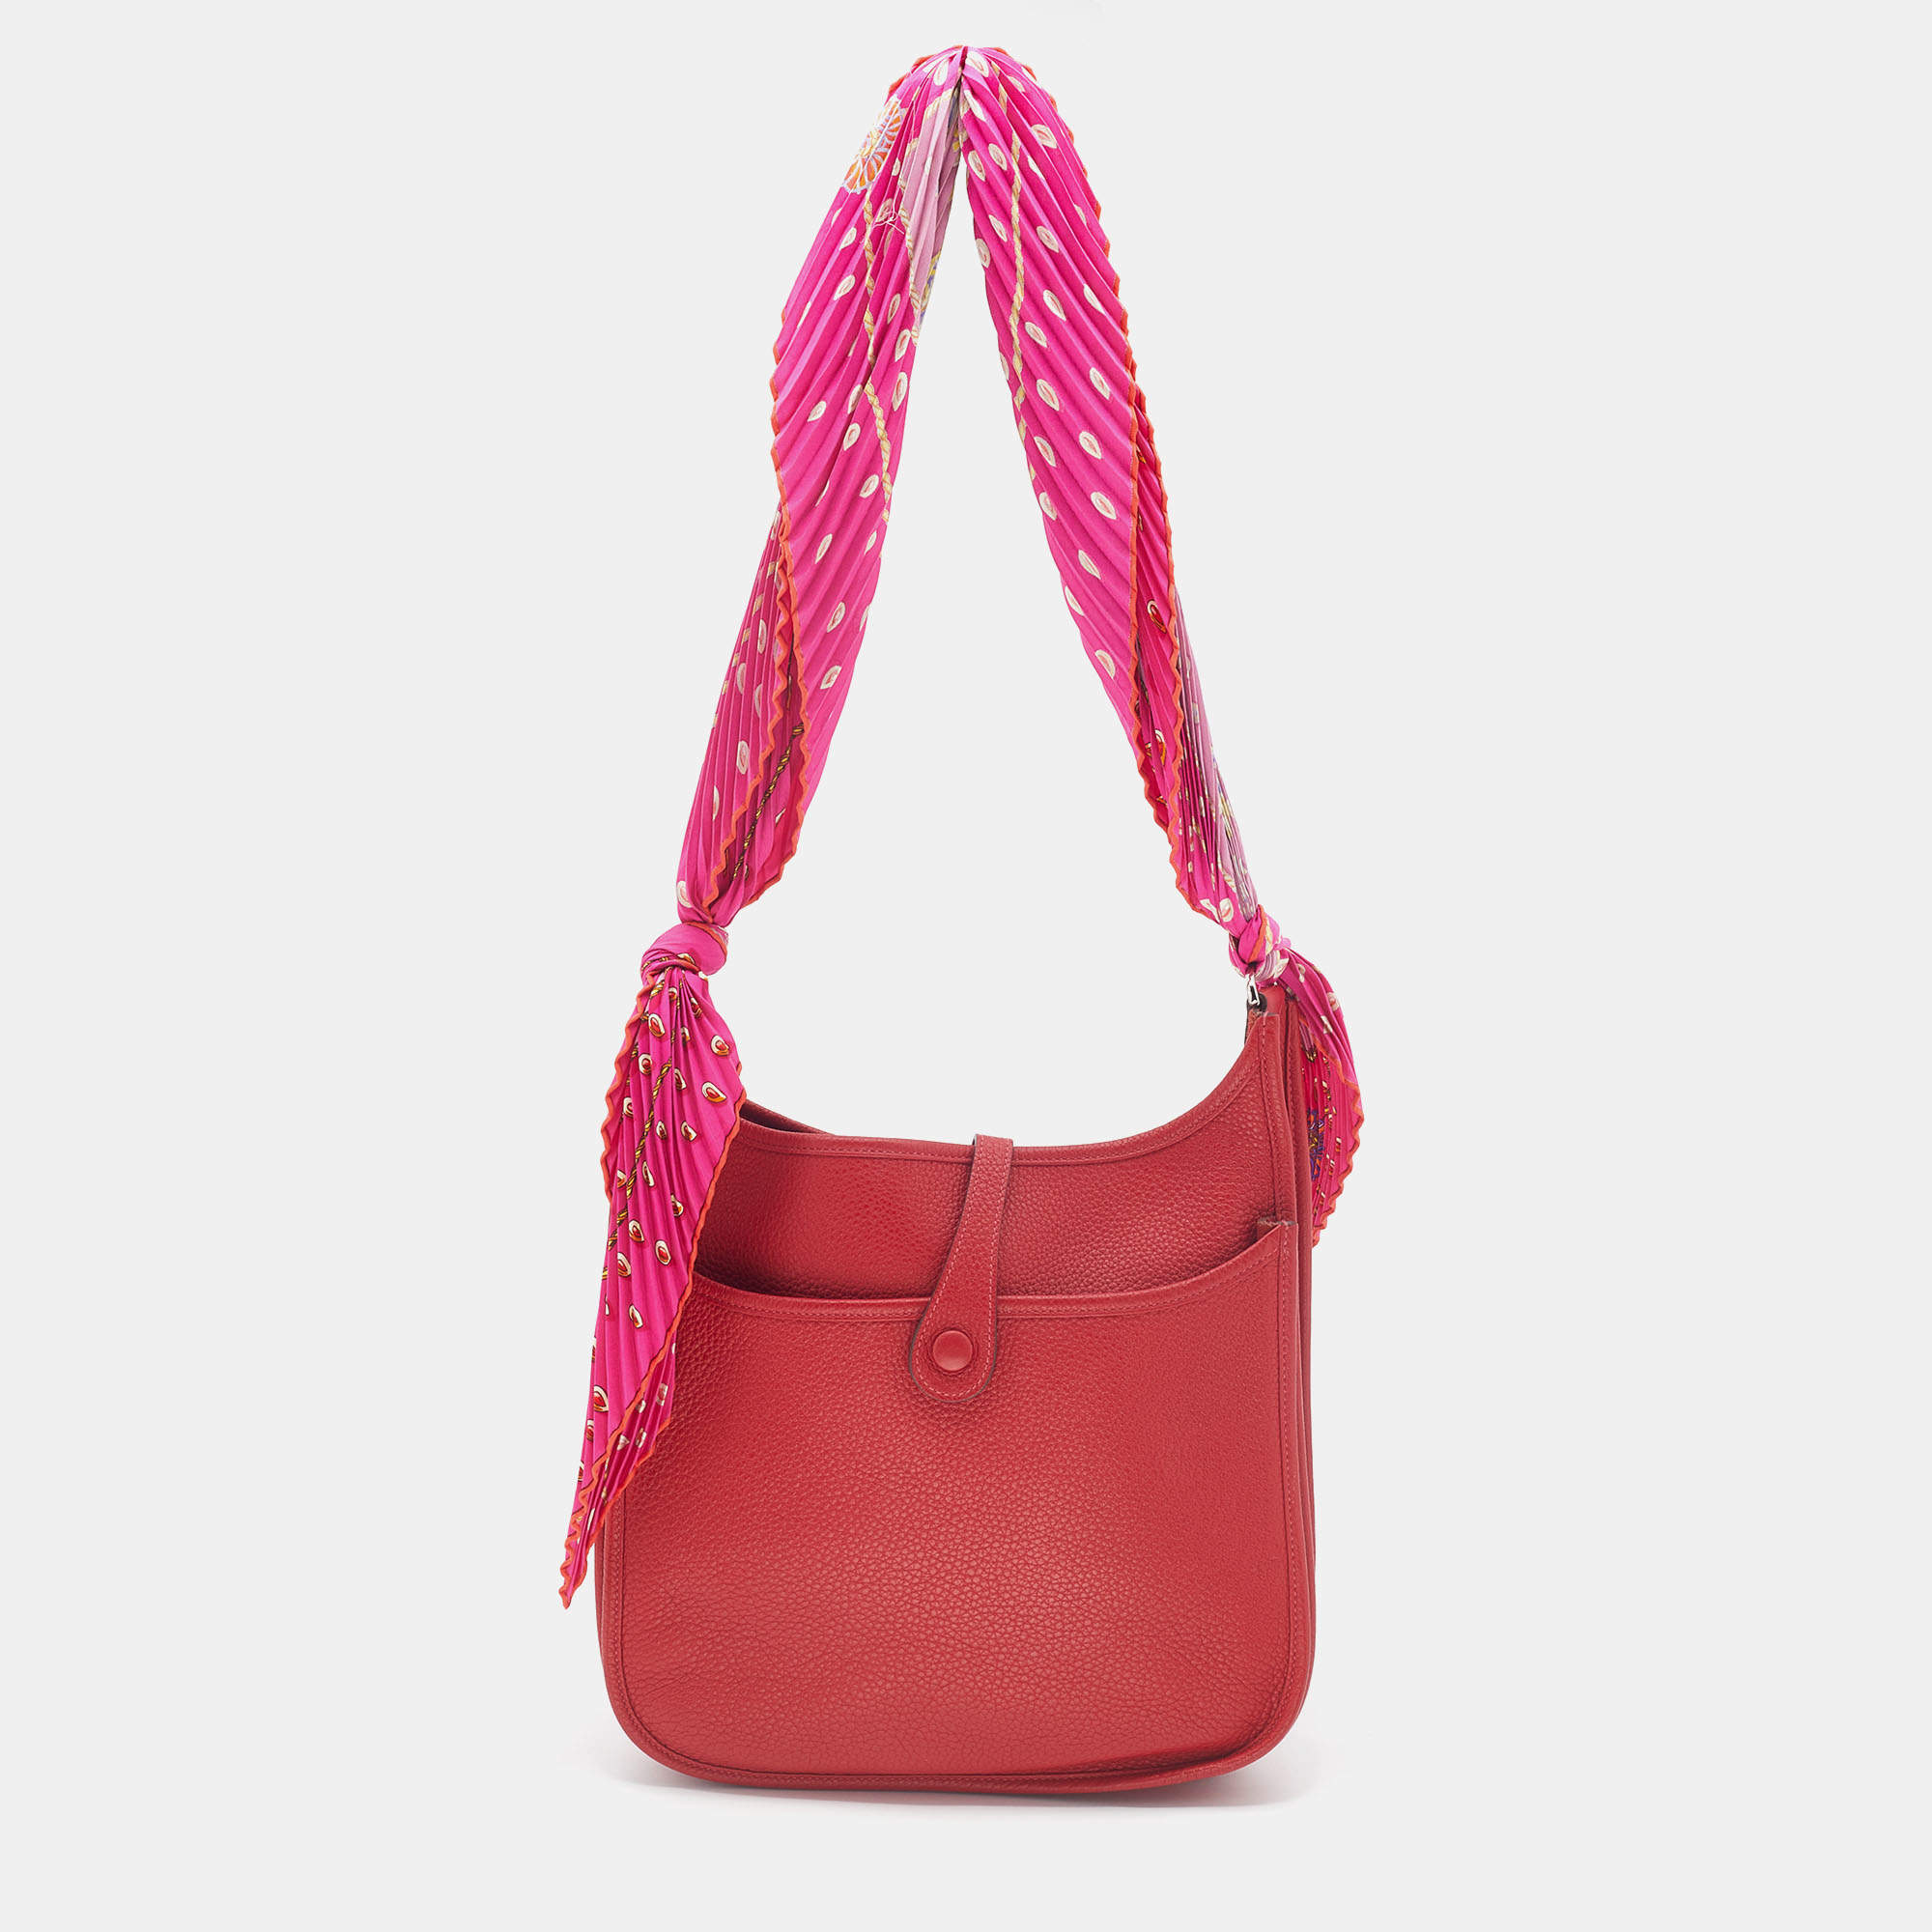 Hermes Rouge H Togo Leather Evelyne I Bag.  Luxury Accessories